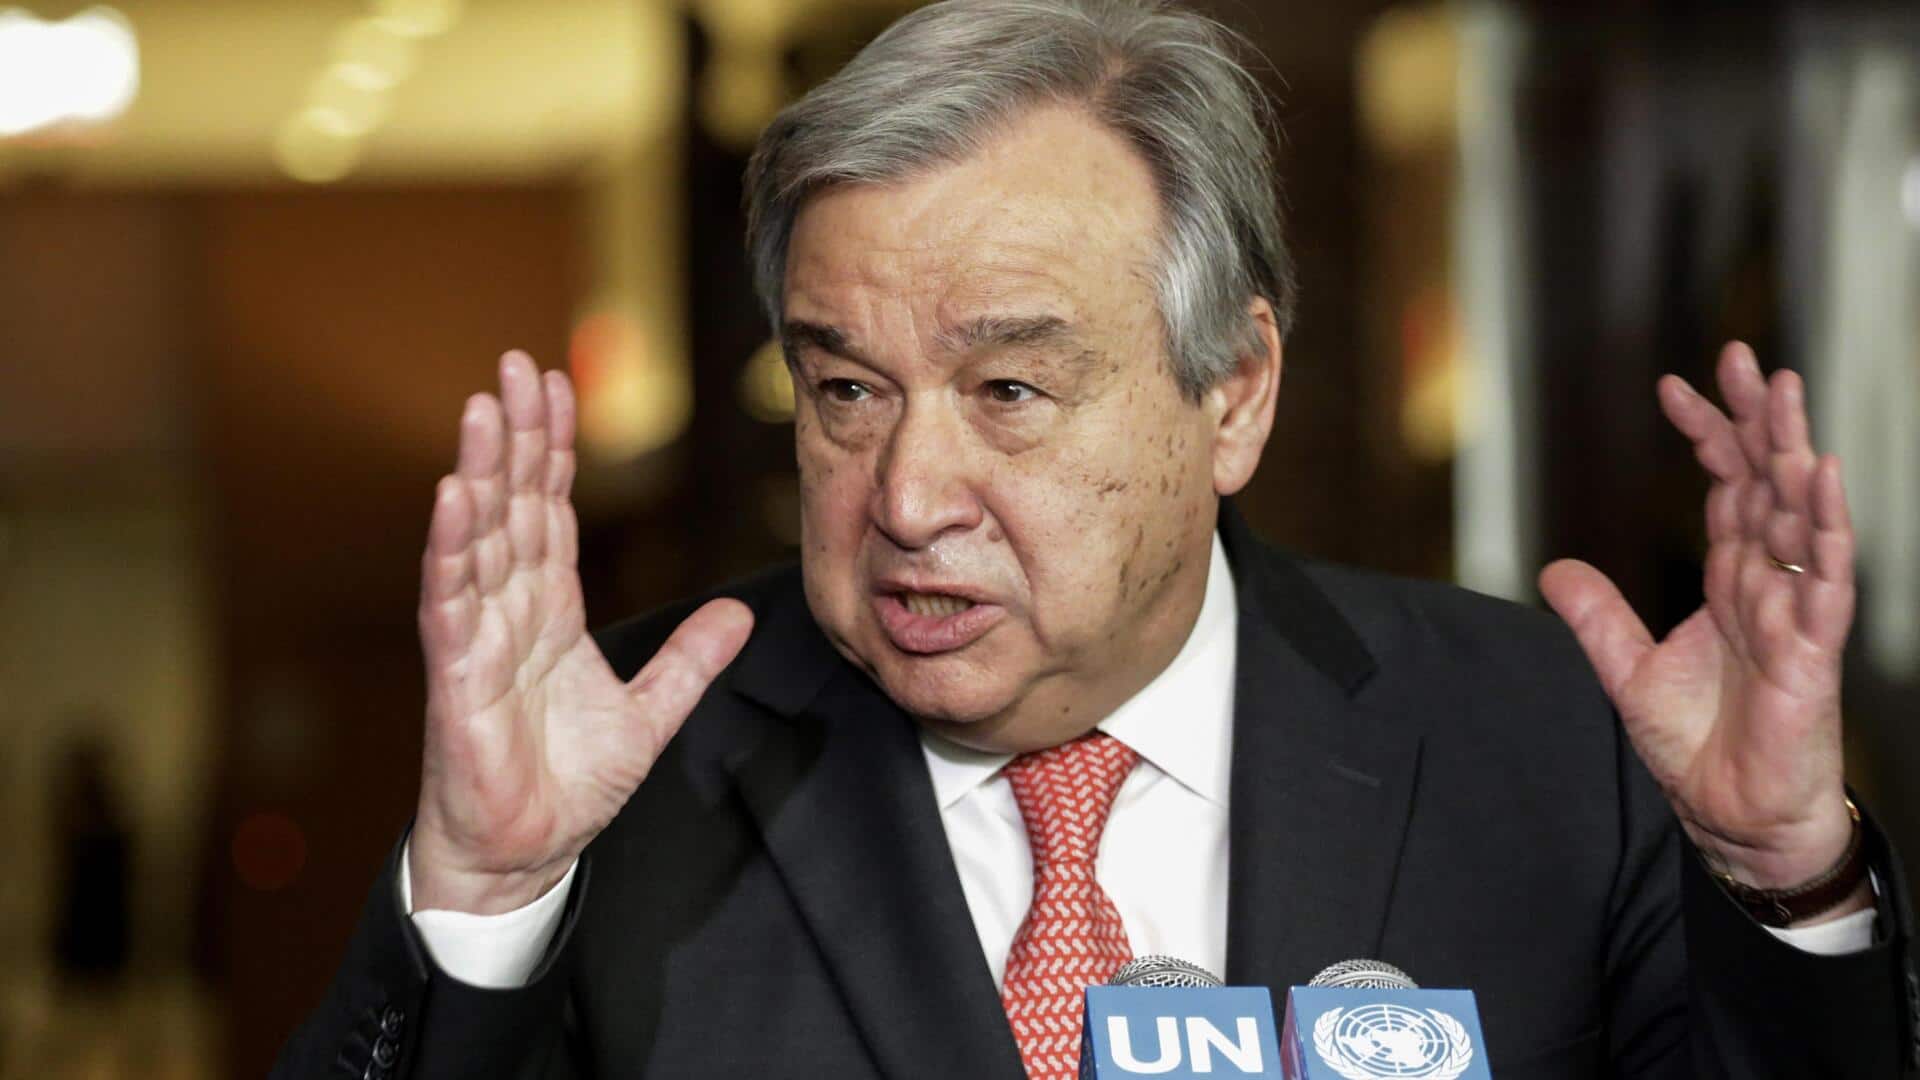 Climate change is a 'madness' we must stop: UN Secretary-General